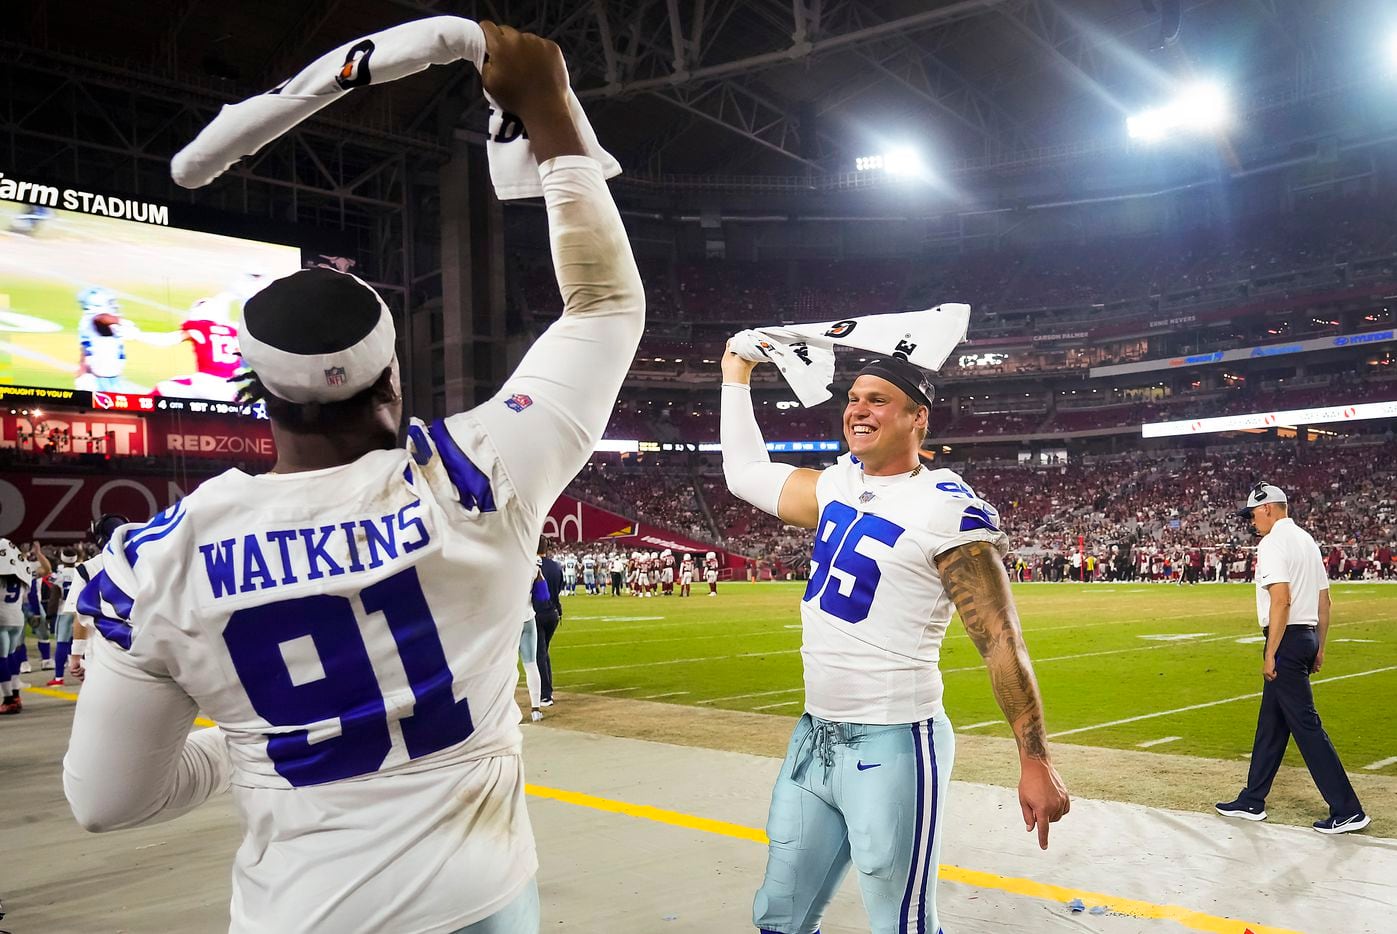 Dallas Cowboys defensive end Brent Urban (95) and defensive end Carlos Watkins (91) wave towels on the sidelines after a Cowboys touchdown during the second half of a preseason NFL football game against the Arizona Cardinals at State Farm Stadium on Friday, Aug. 13, 2021, in Glendale, Ariz.